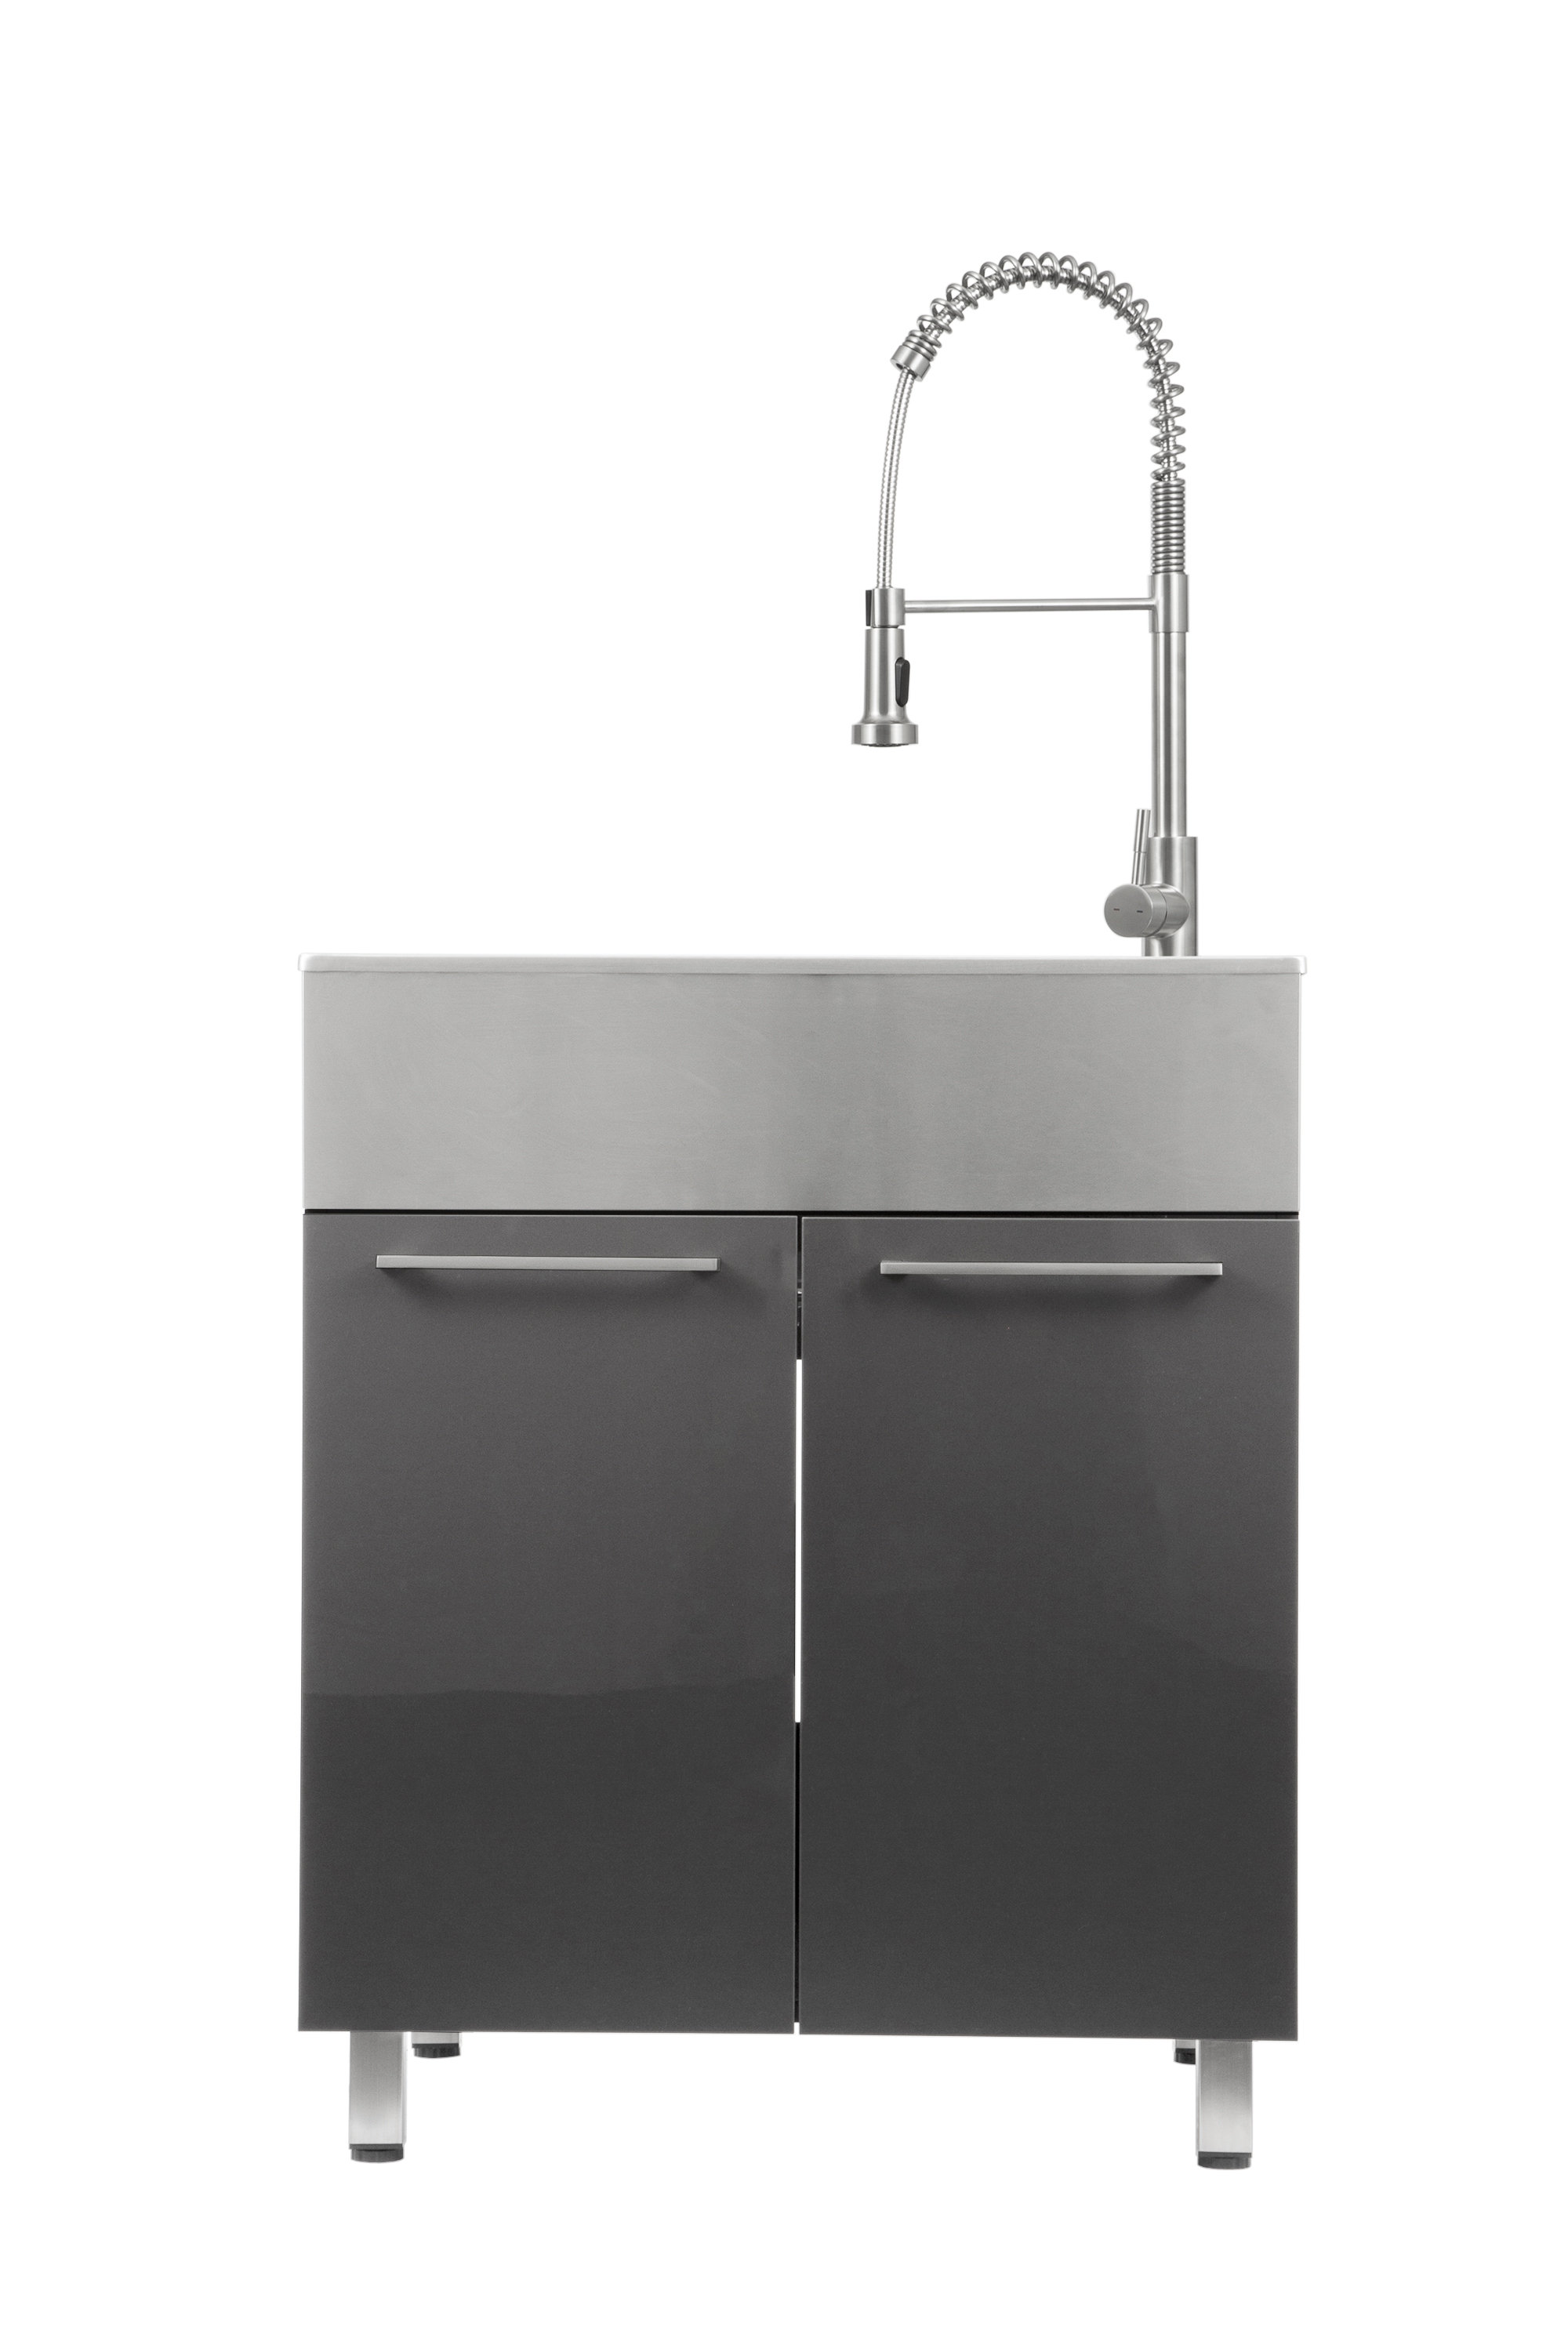 presenza All-in-One 28 in. x 22 in. x 33.8 in. Stainless Steel Drop-In Sink and Cabinet with Faucet in White, Brushed Stainless Steel